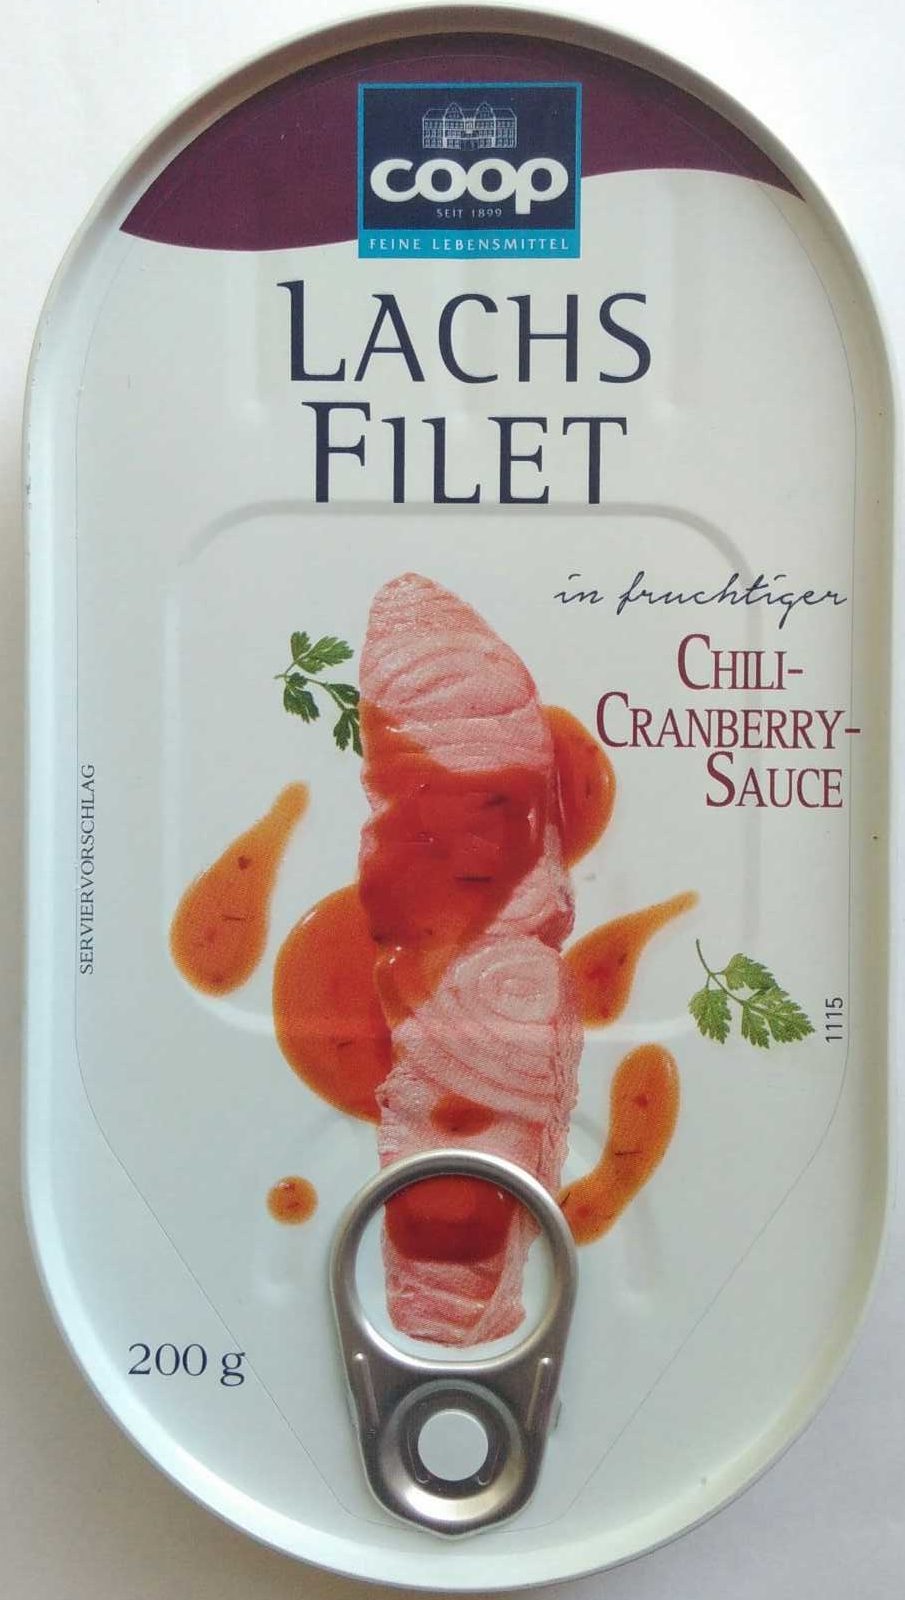 Lachsfilet in fruchtiger Chili-Cranberry-Sauce - Product - de